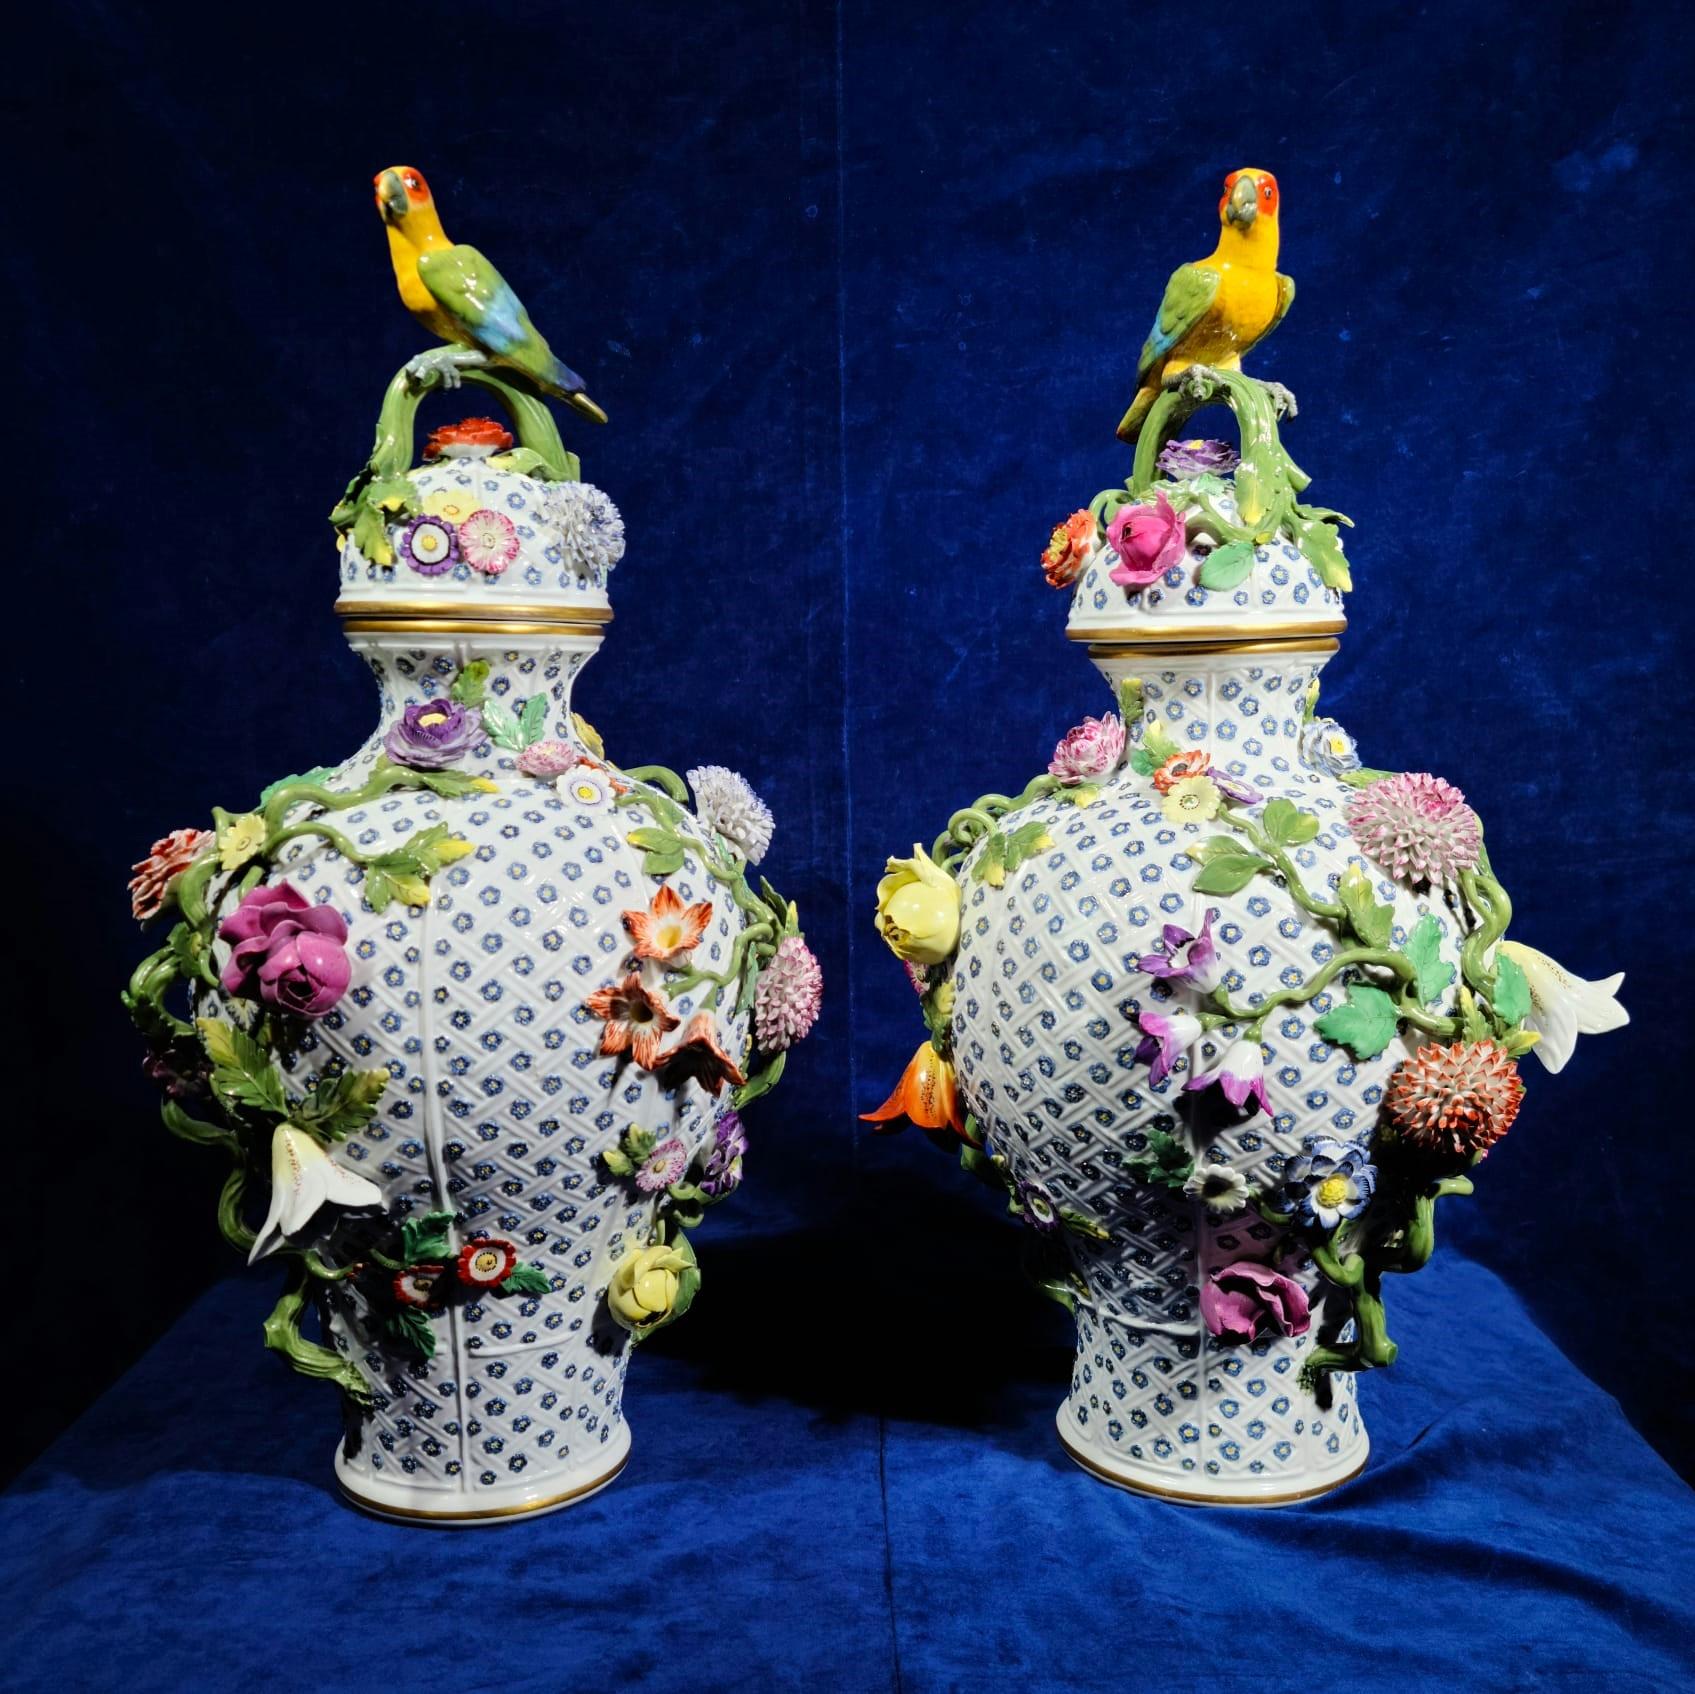 An incredible pair of 19th century Rococo Style Meissen Porcelain parrot and flower encrusted lidded vases. Each is absolutely stunning with a variety of hand-painted and encrusted flowers, vines, and leaves flowing throughout the vases. The bodies